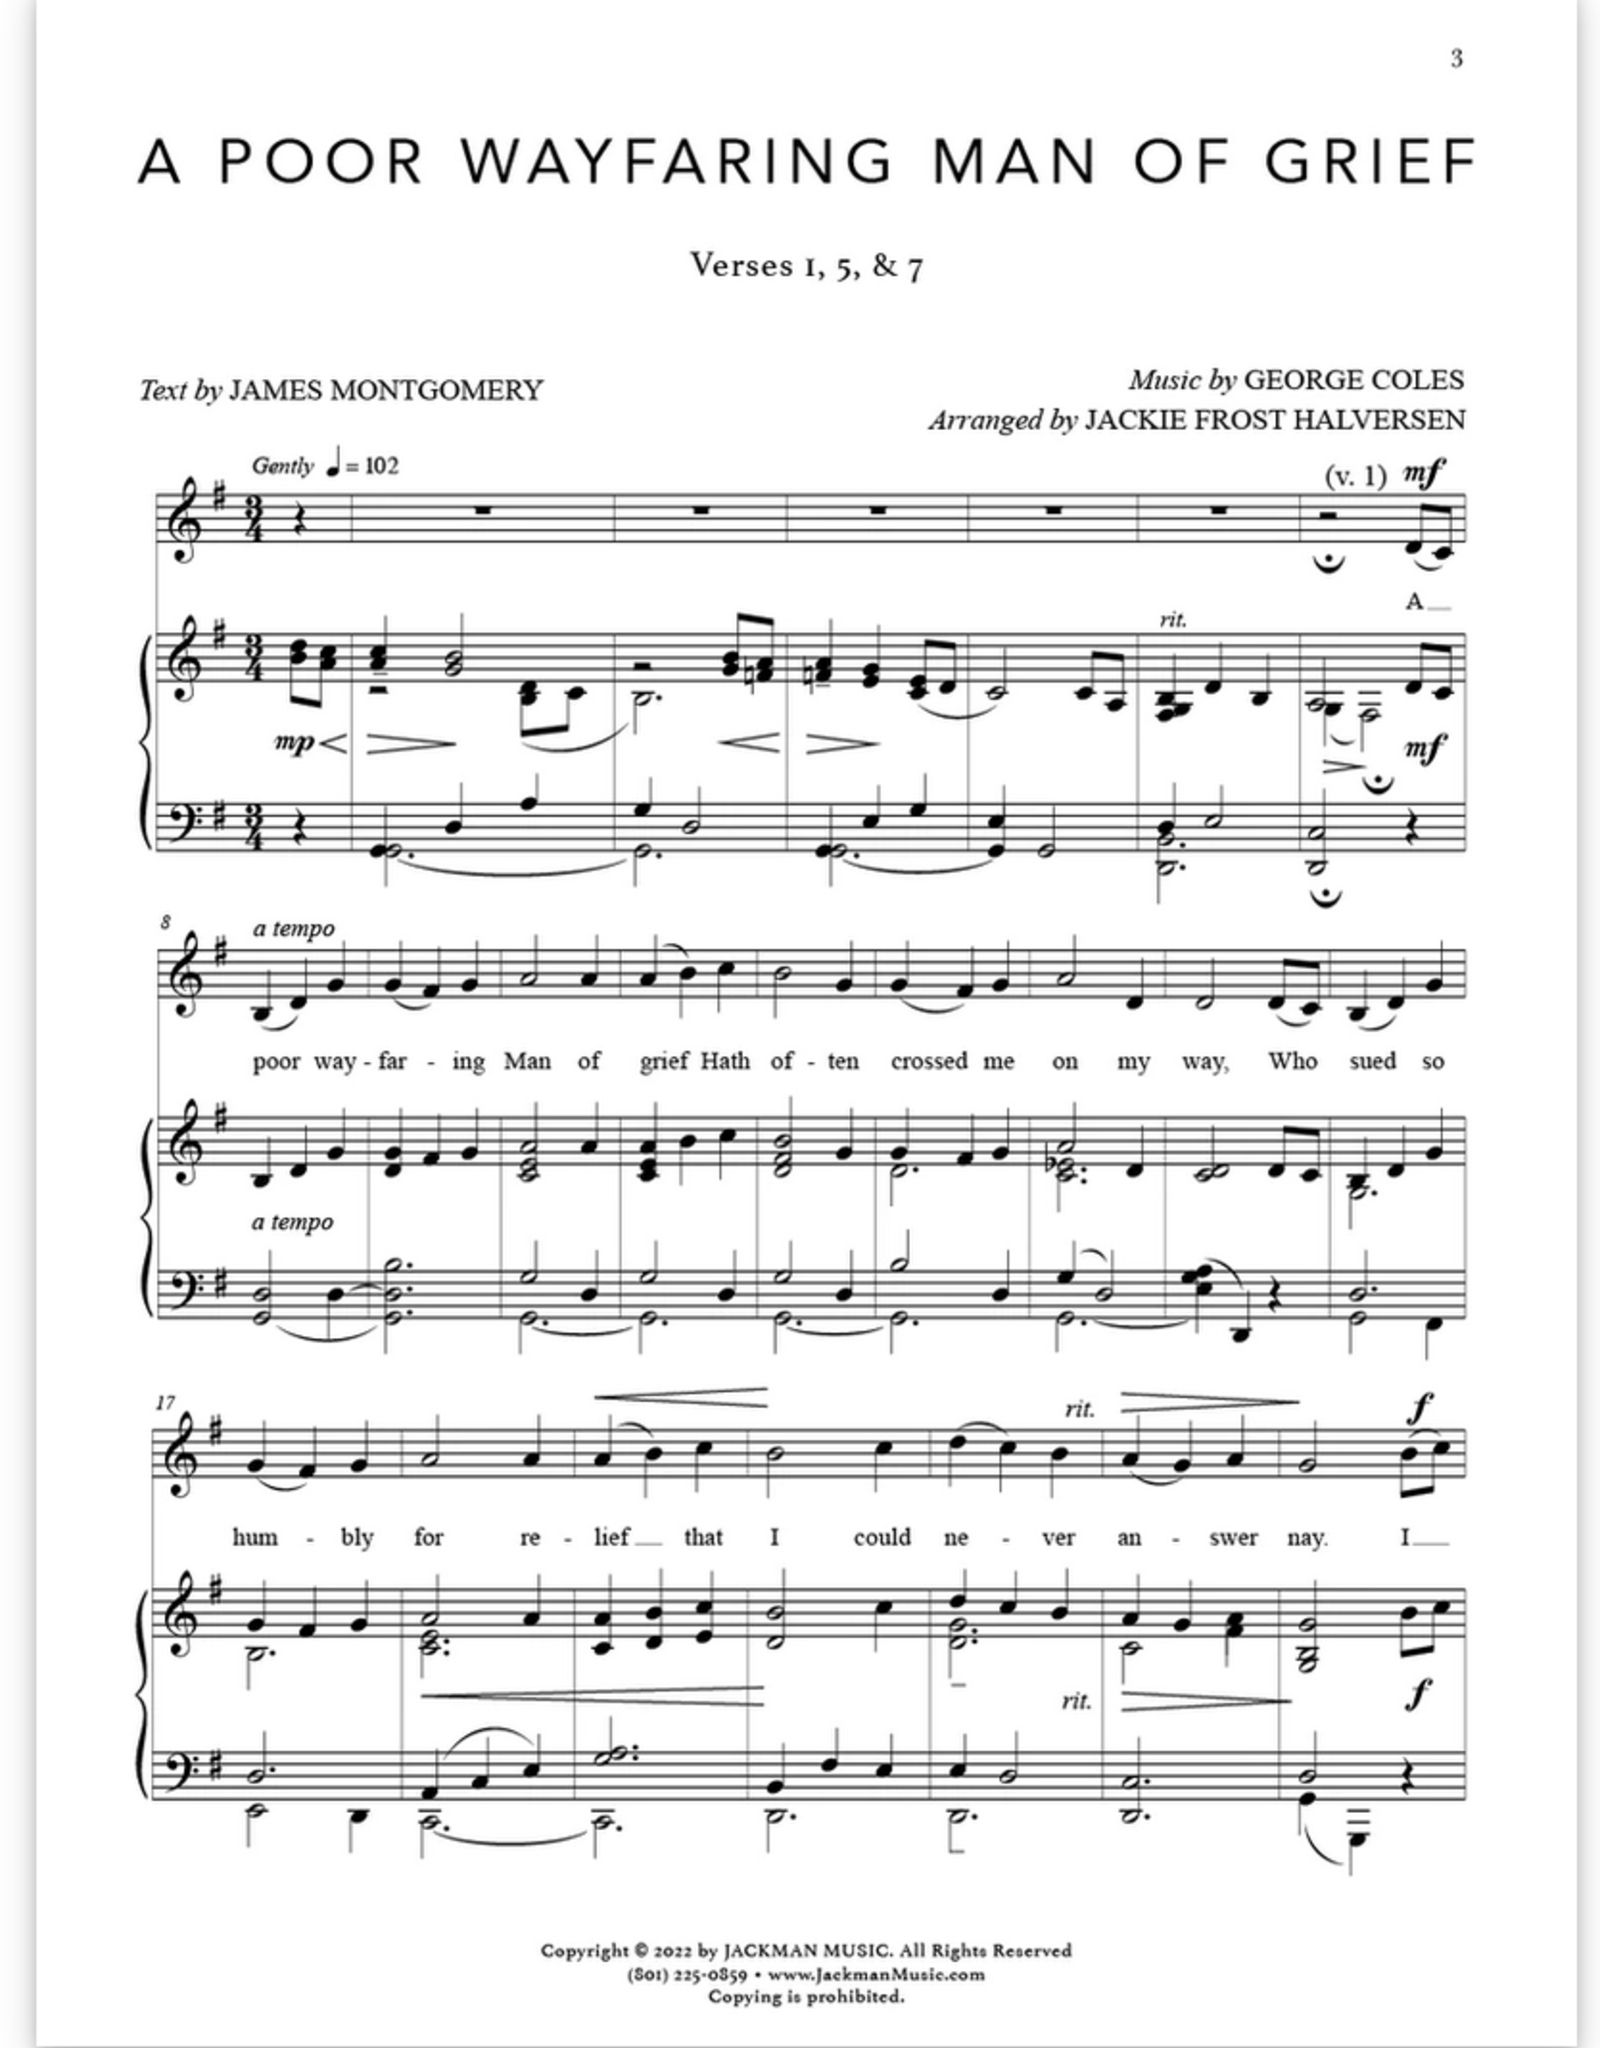 Jackman Music That All May Be Edified - Unison Hymn Arrangements by Jackie Frost Halversen